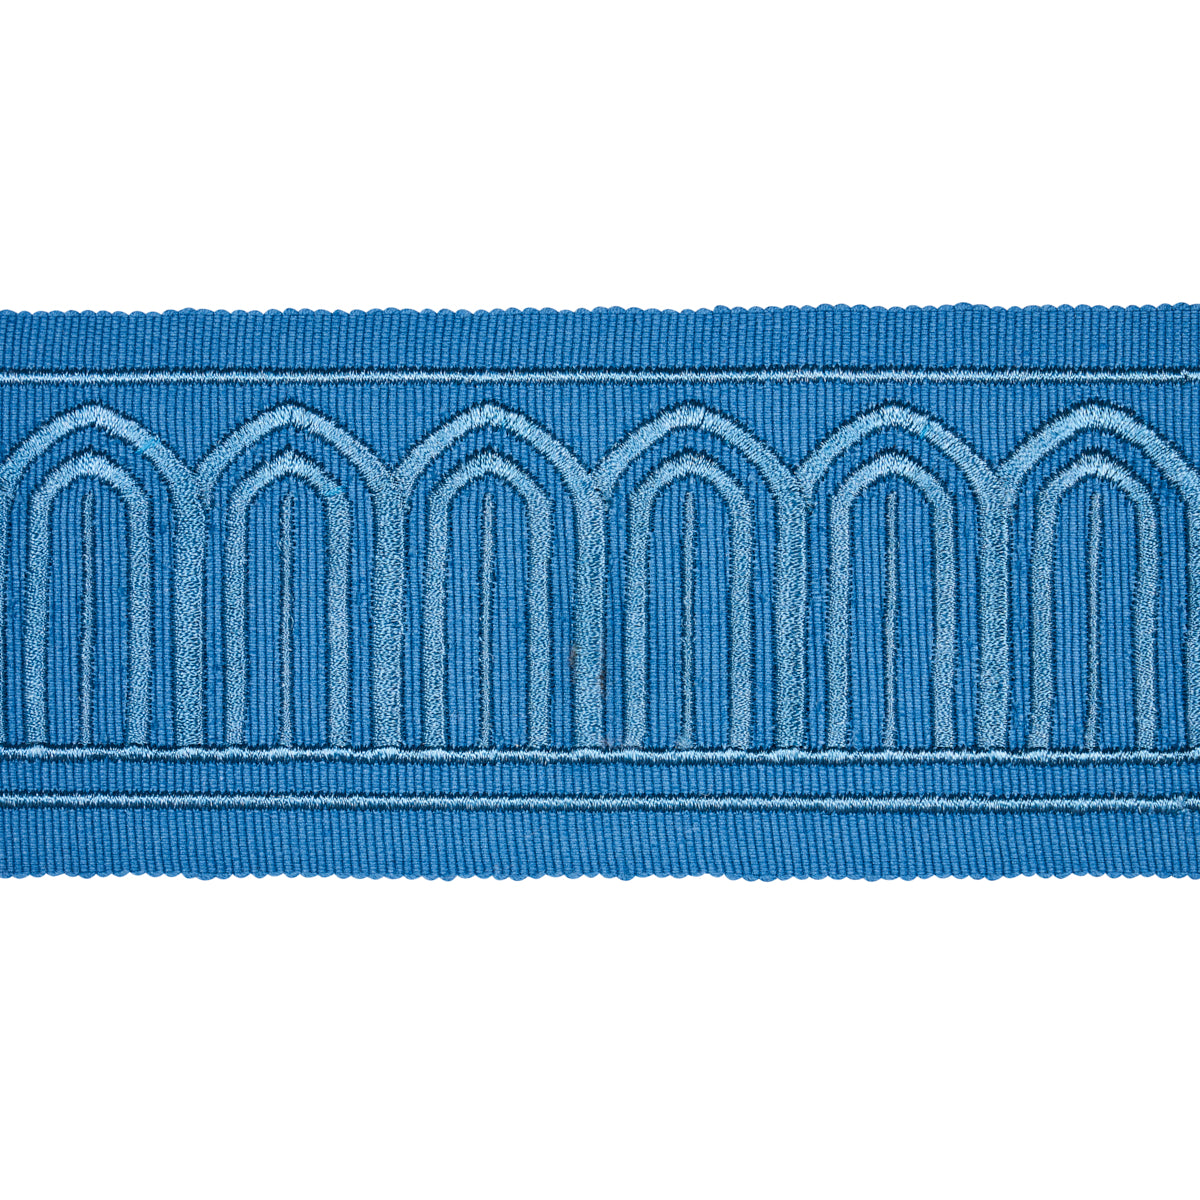 ARCHES EMBROIDERED TAPE MEDIUM | TEAL